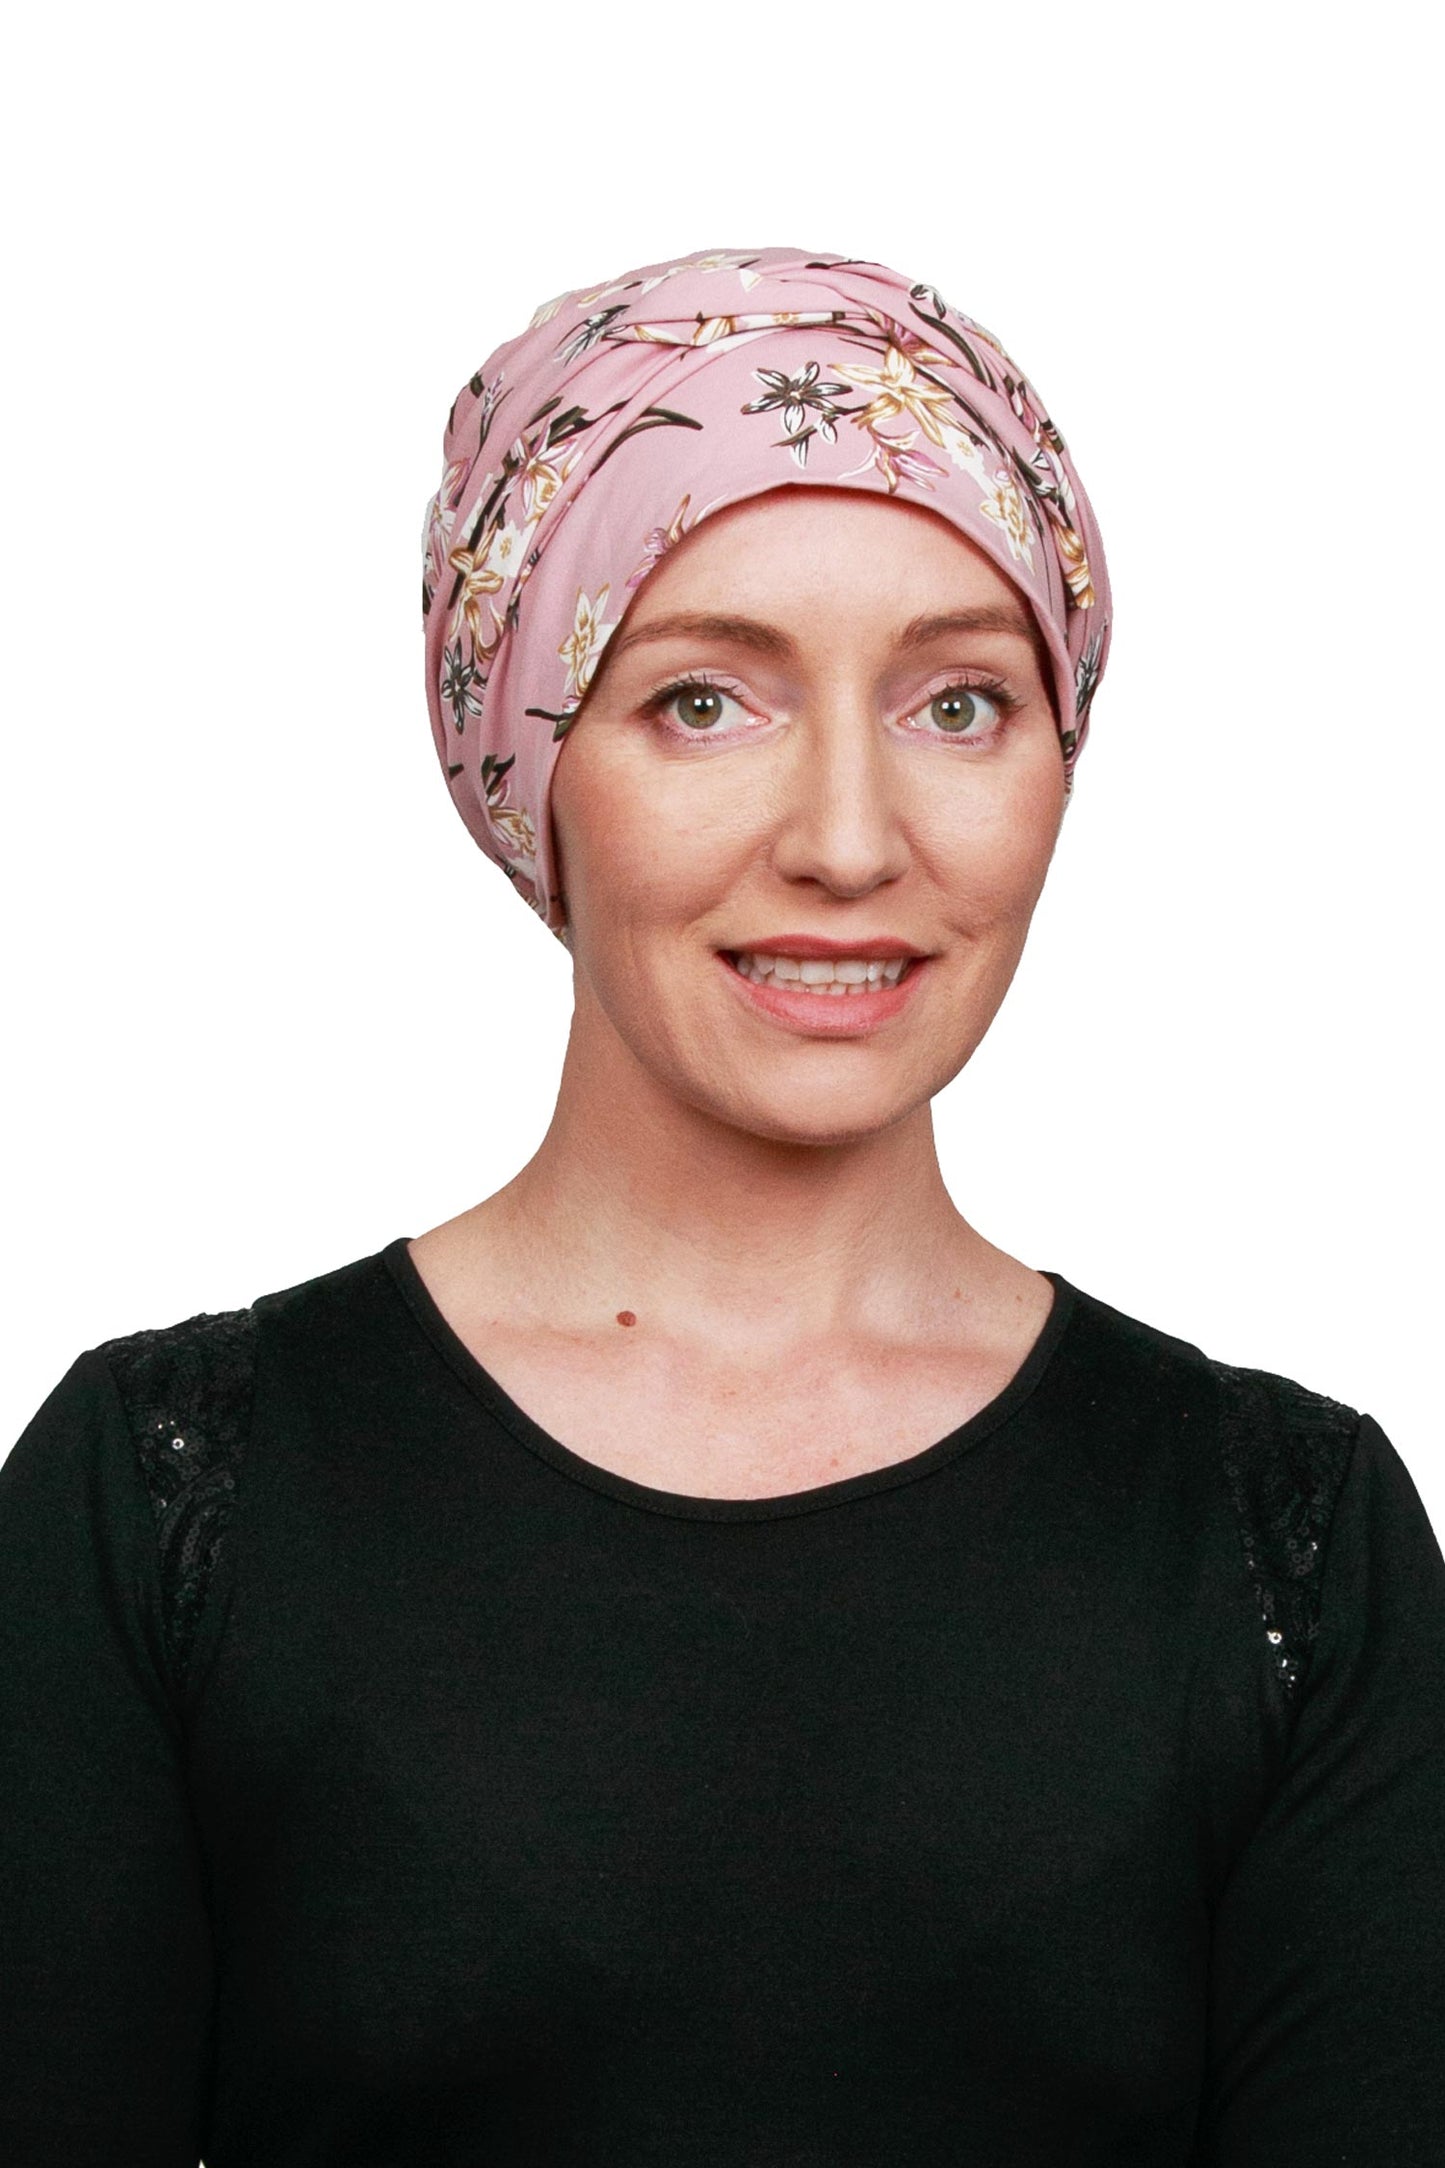 Aster 1 Cancer Wrap Hat - Pink - Kaus Hats